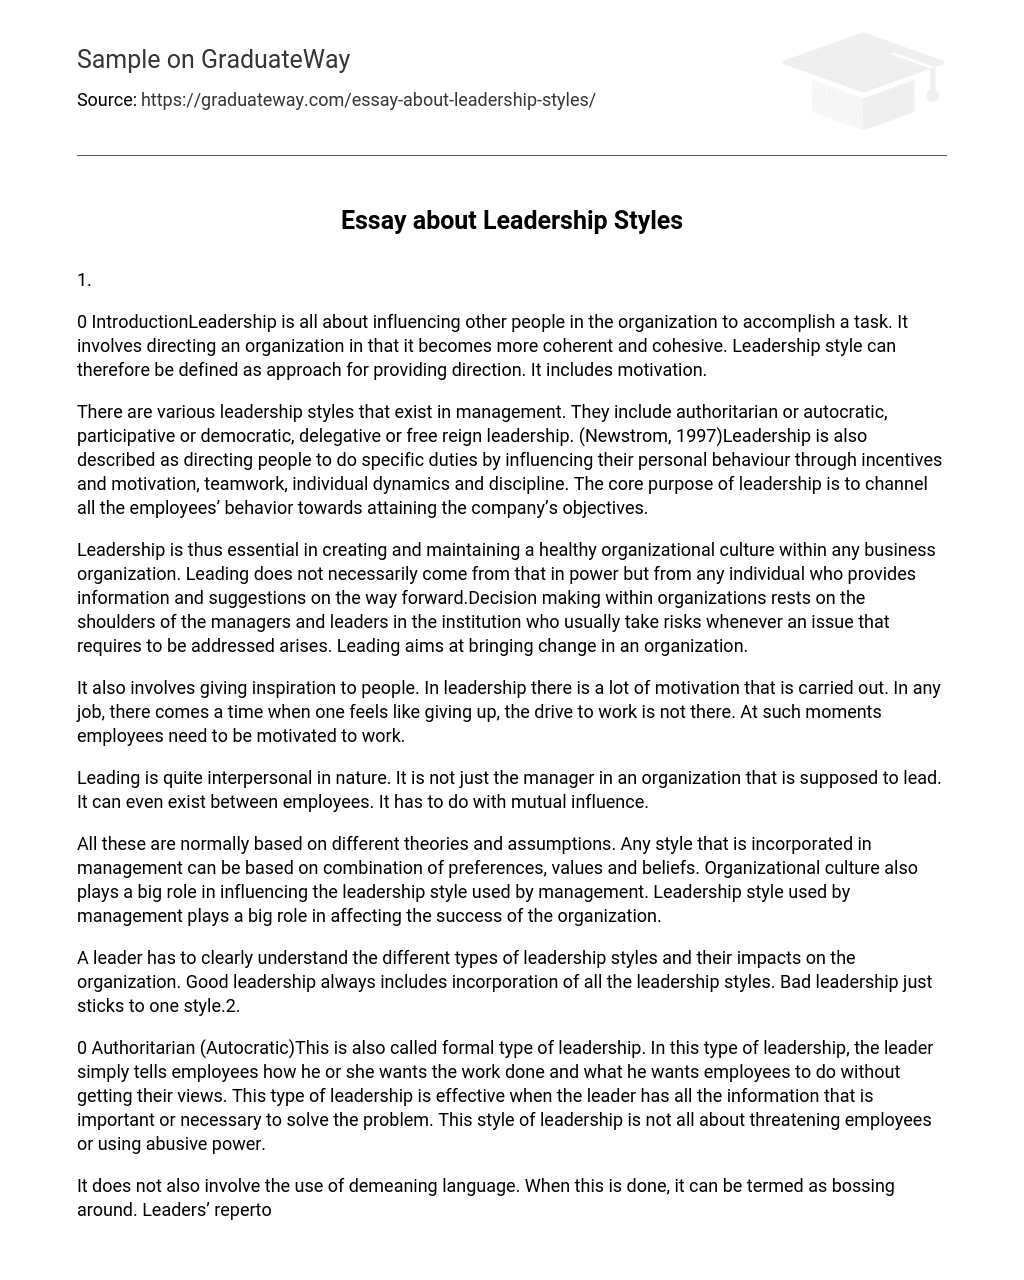 Essay about Leadership Styles